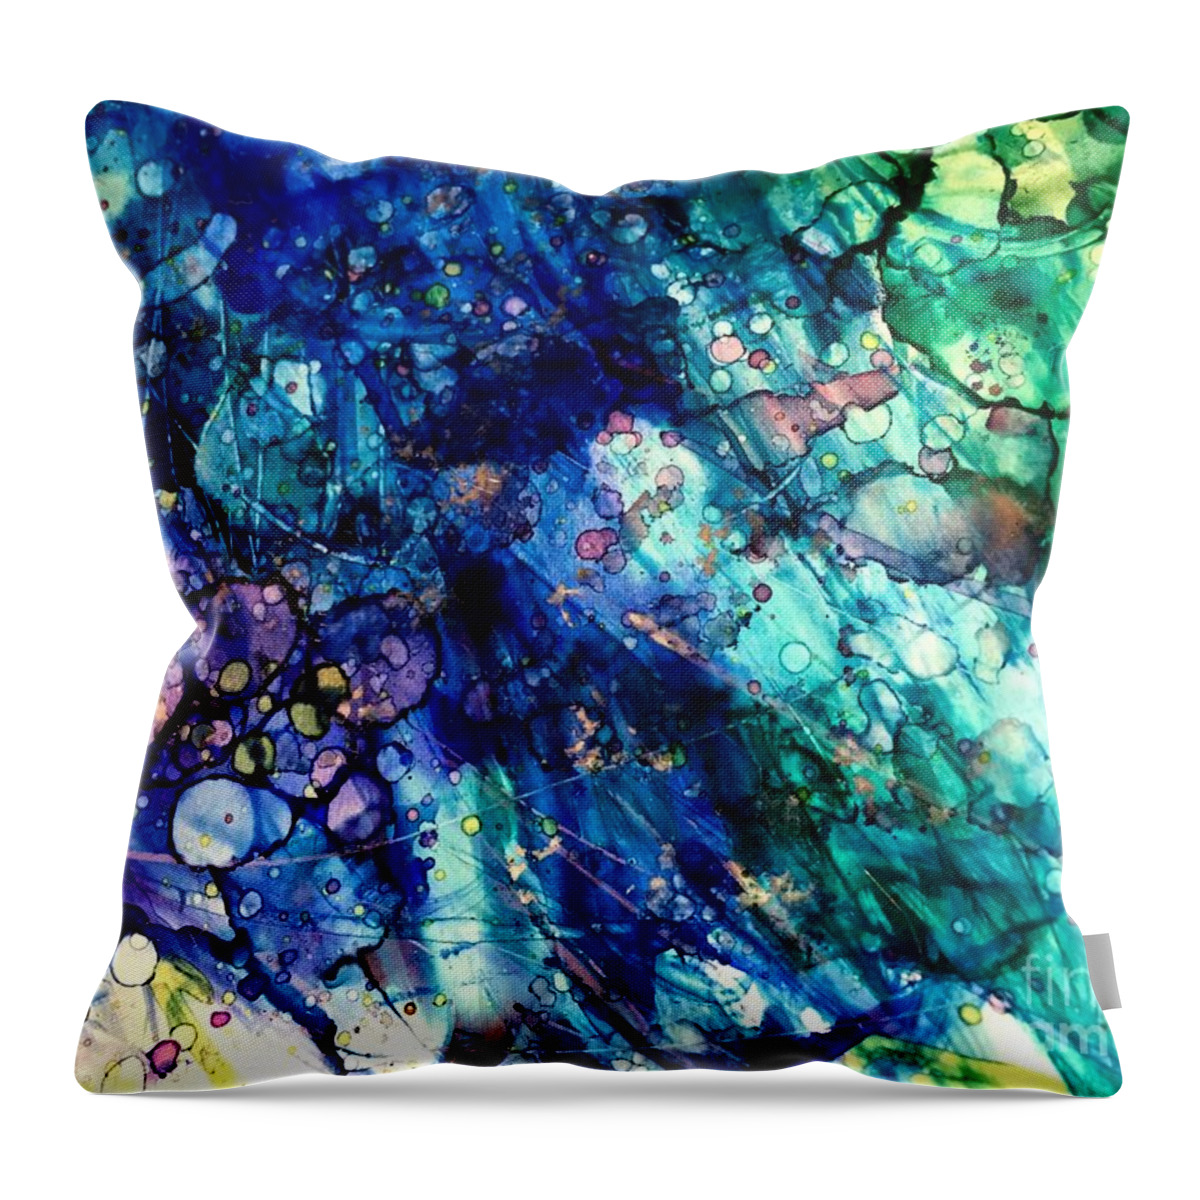 Abstract Painting. Throw Pillow featuring the painting Inflow by Nancy Koehler